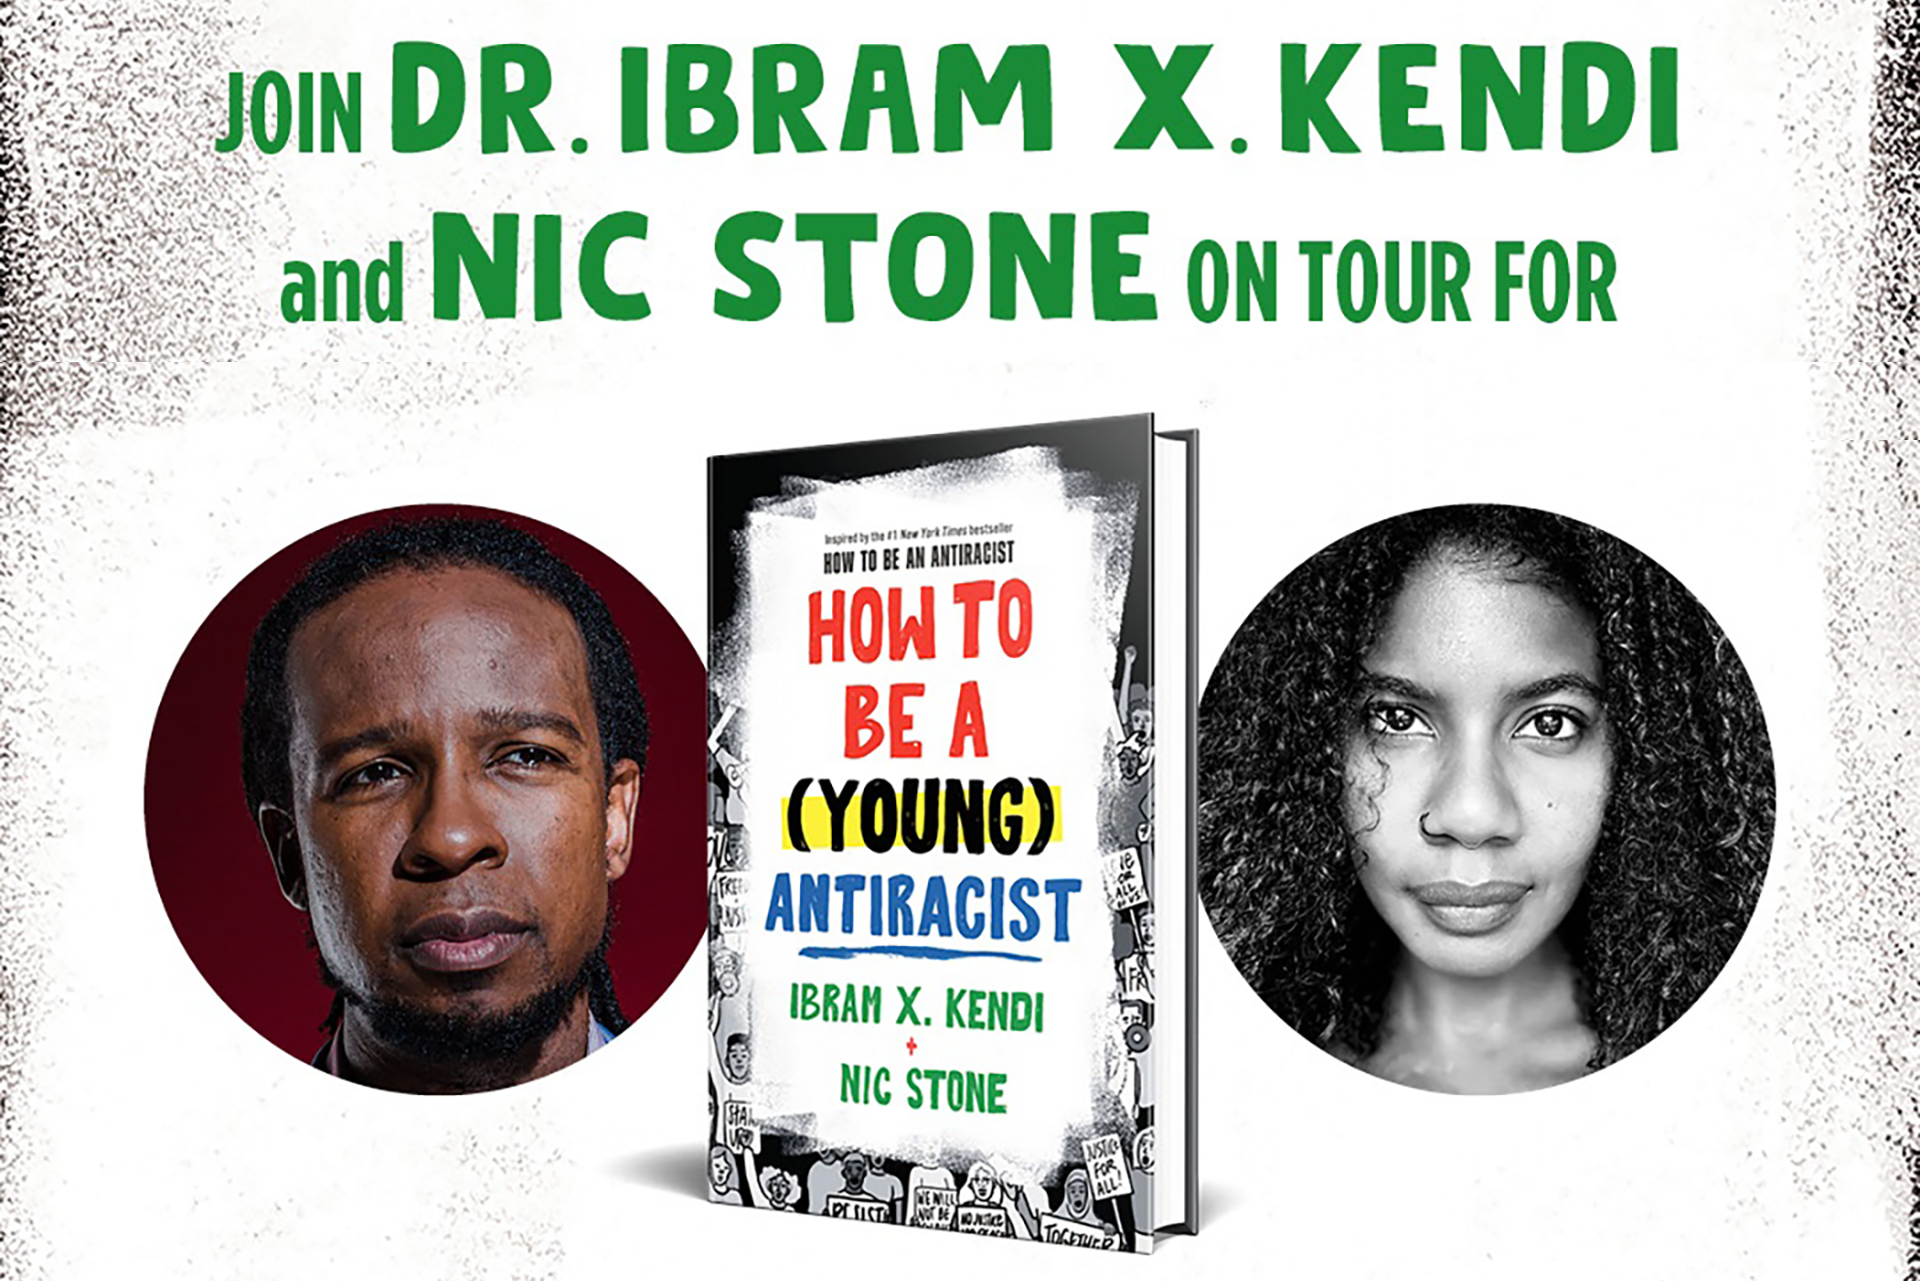 Book Release: How to be a (Young) Antiracist with Ibram X. Kendi and Nic Stone